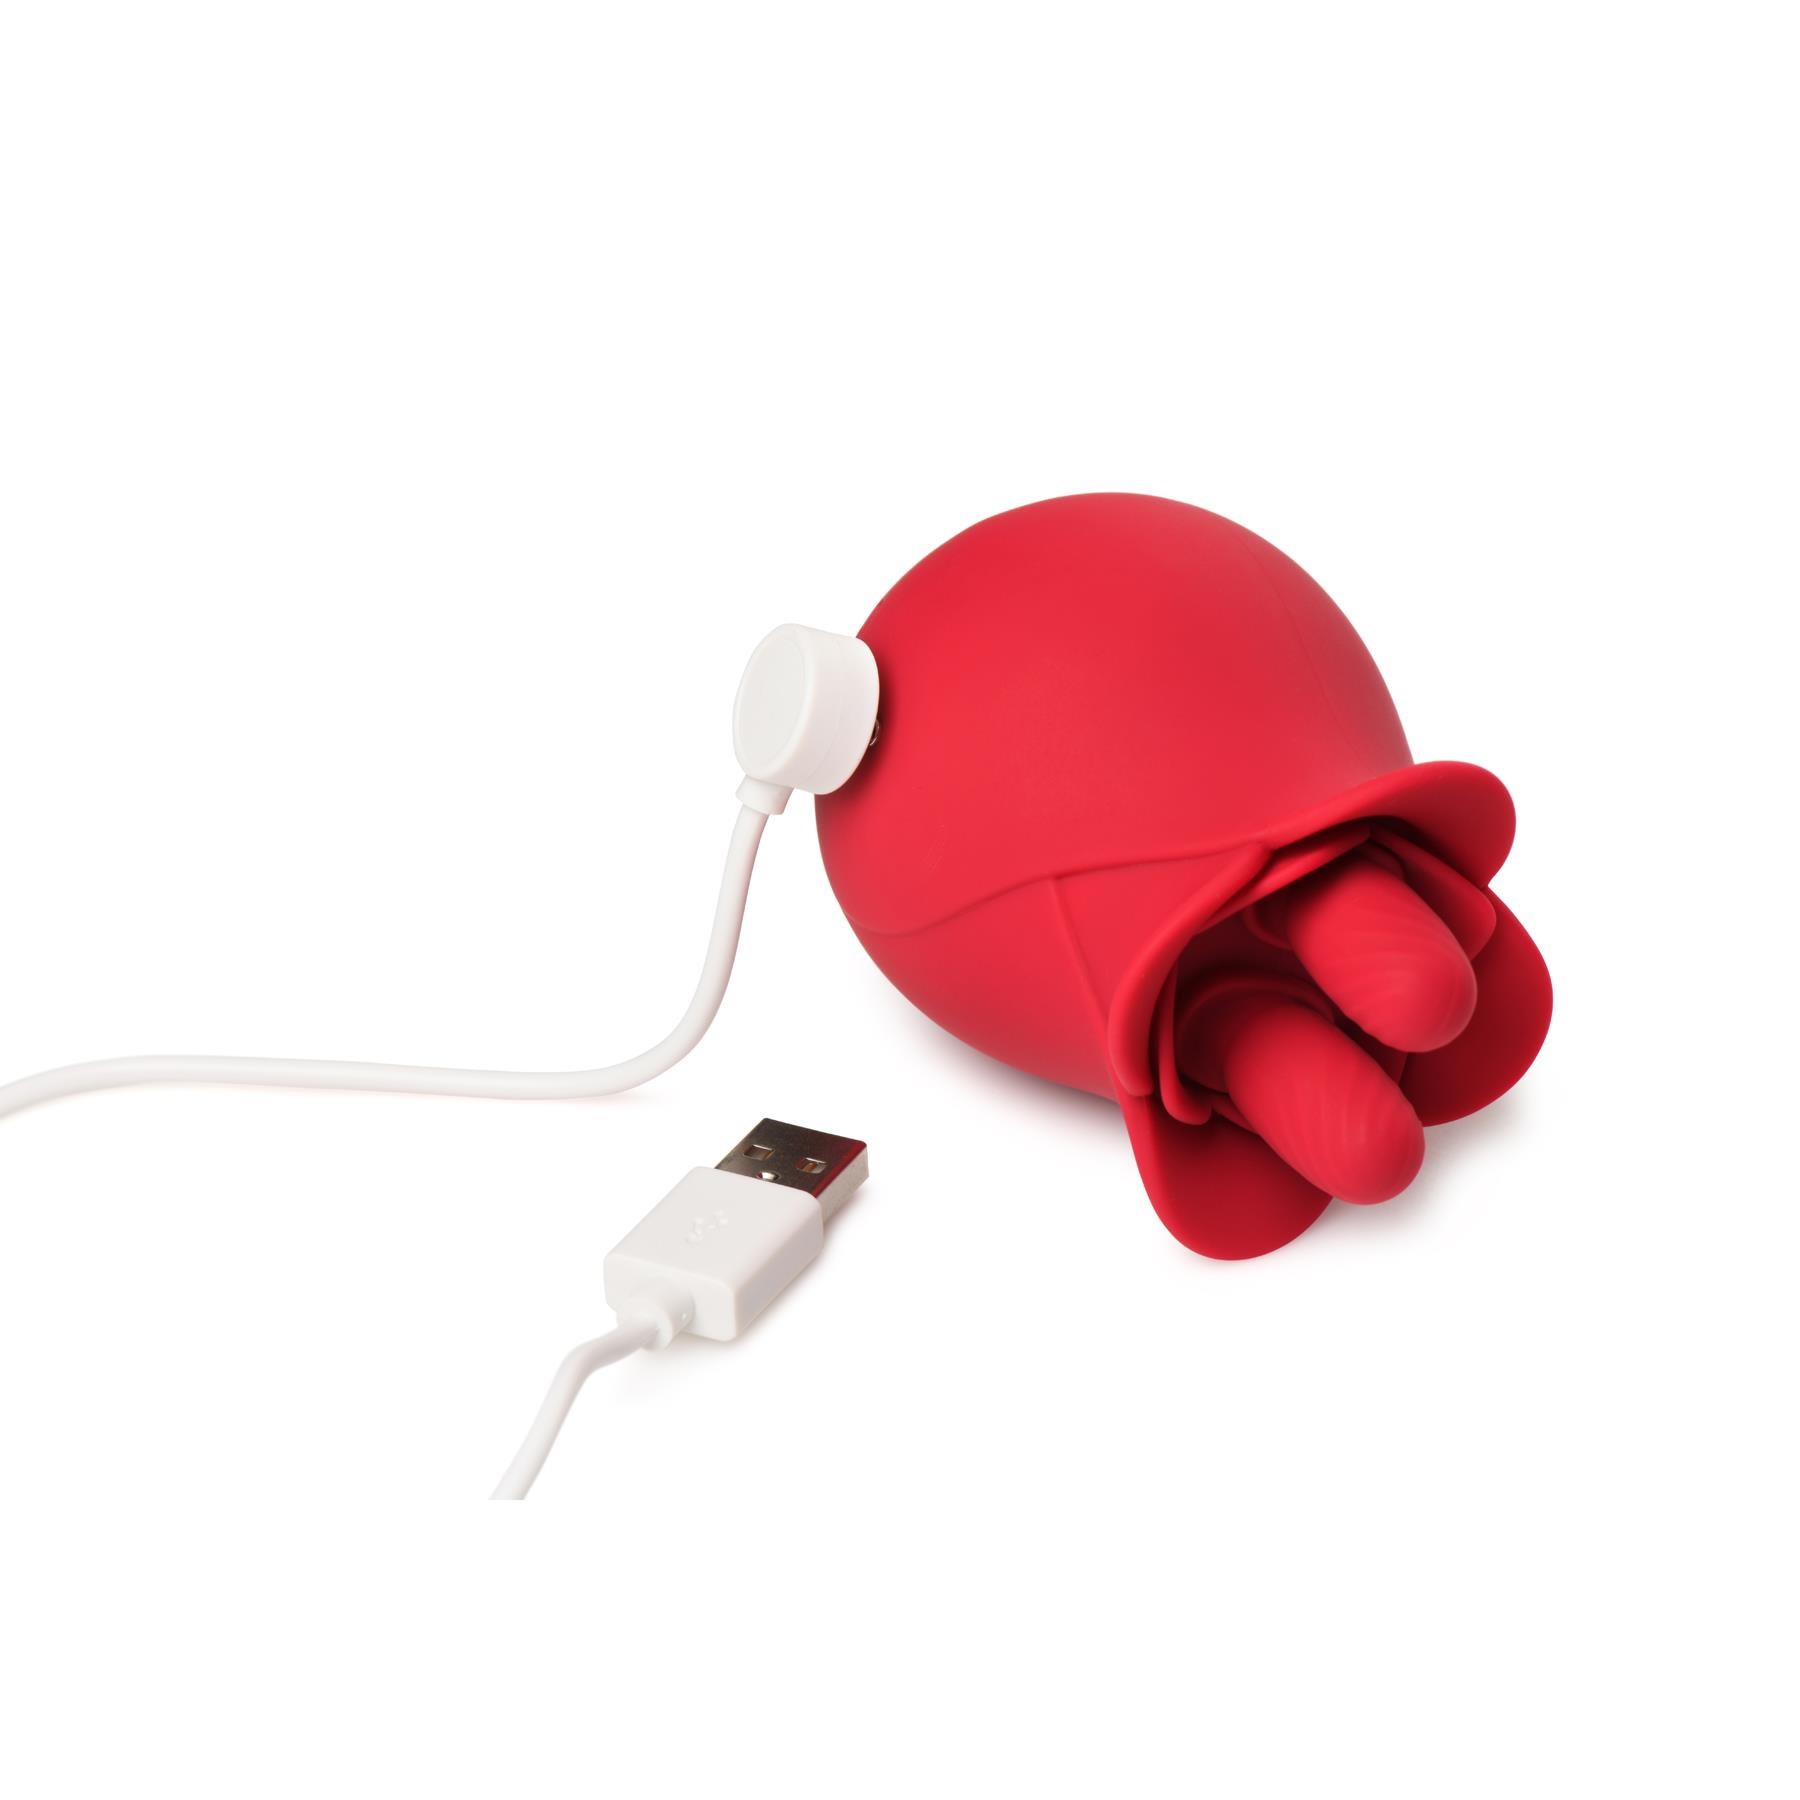 Bloomgasm Rose Fondle Massager - Showing Where Charging Cable is Placed